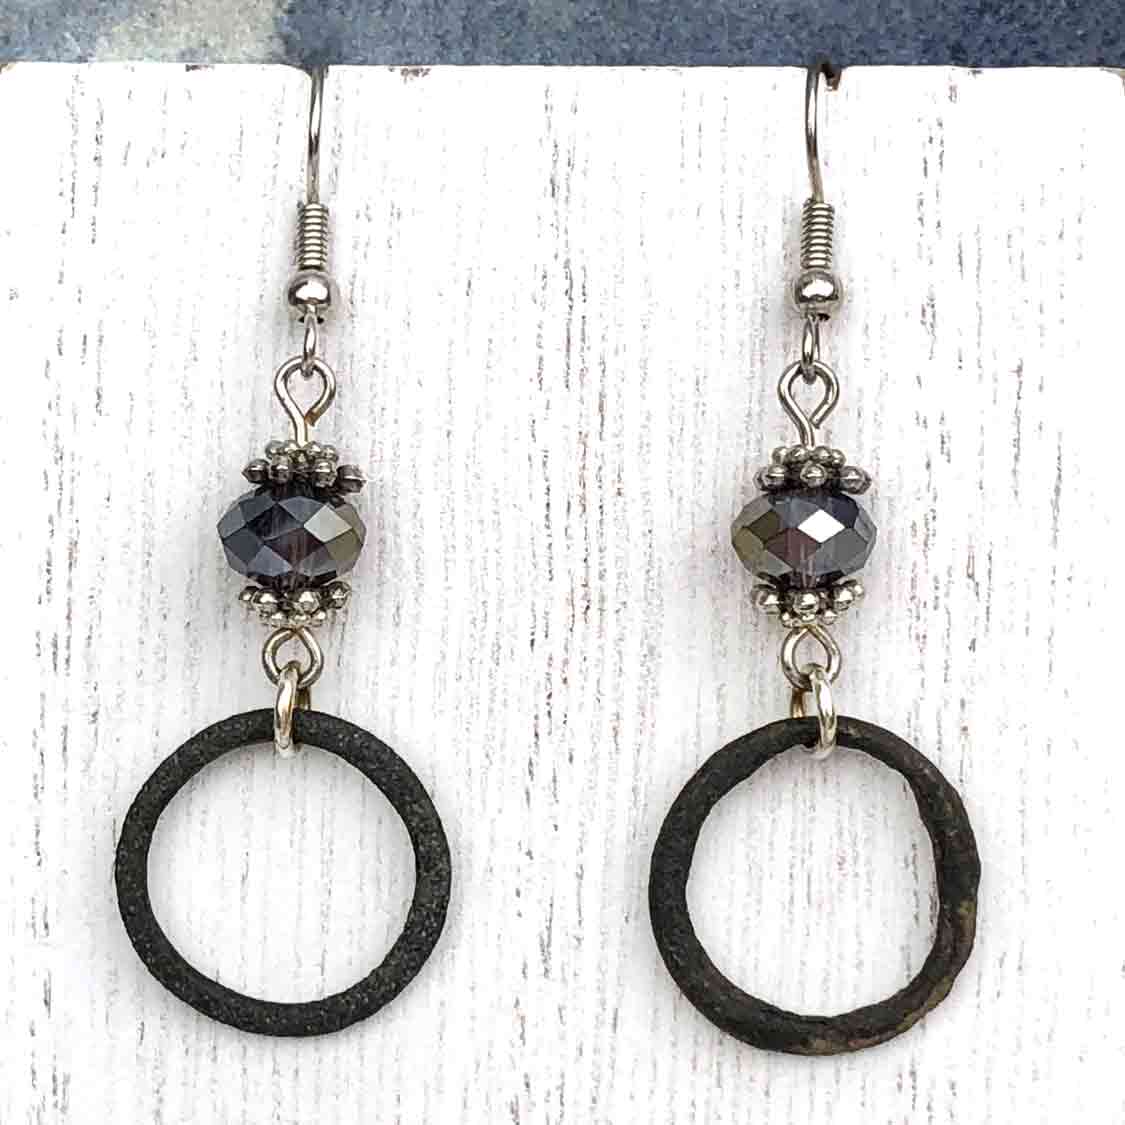 Darkest Bronze Celtic Ring Money Earrings with Midnight Crystal Charms